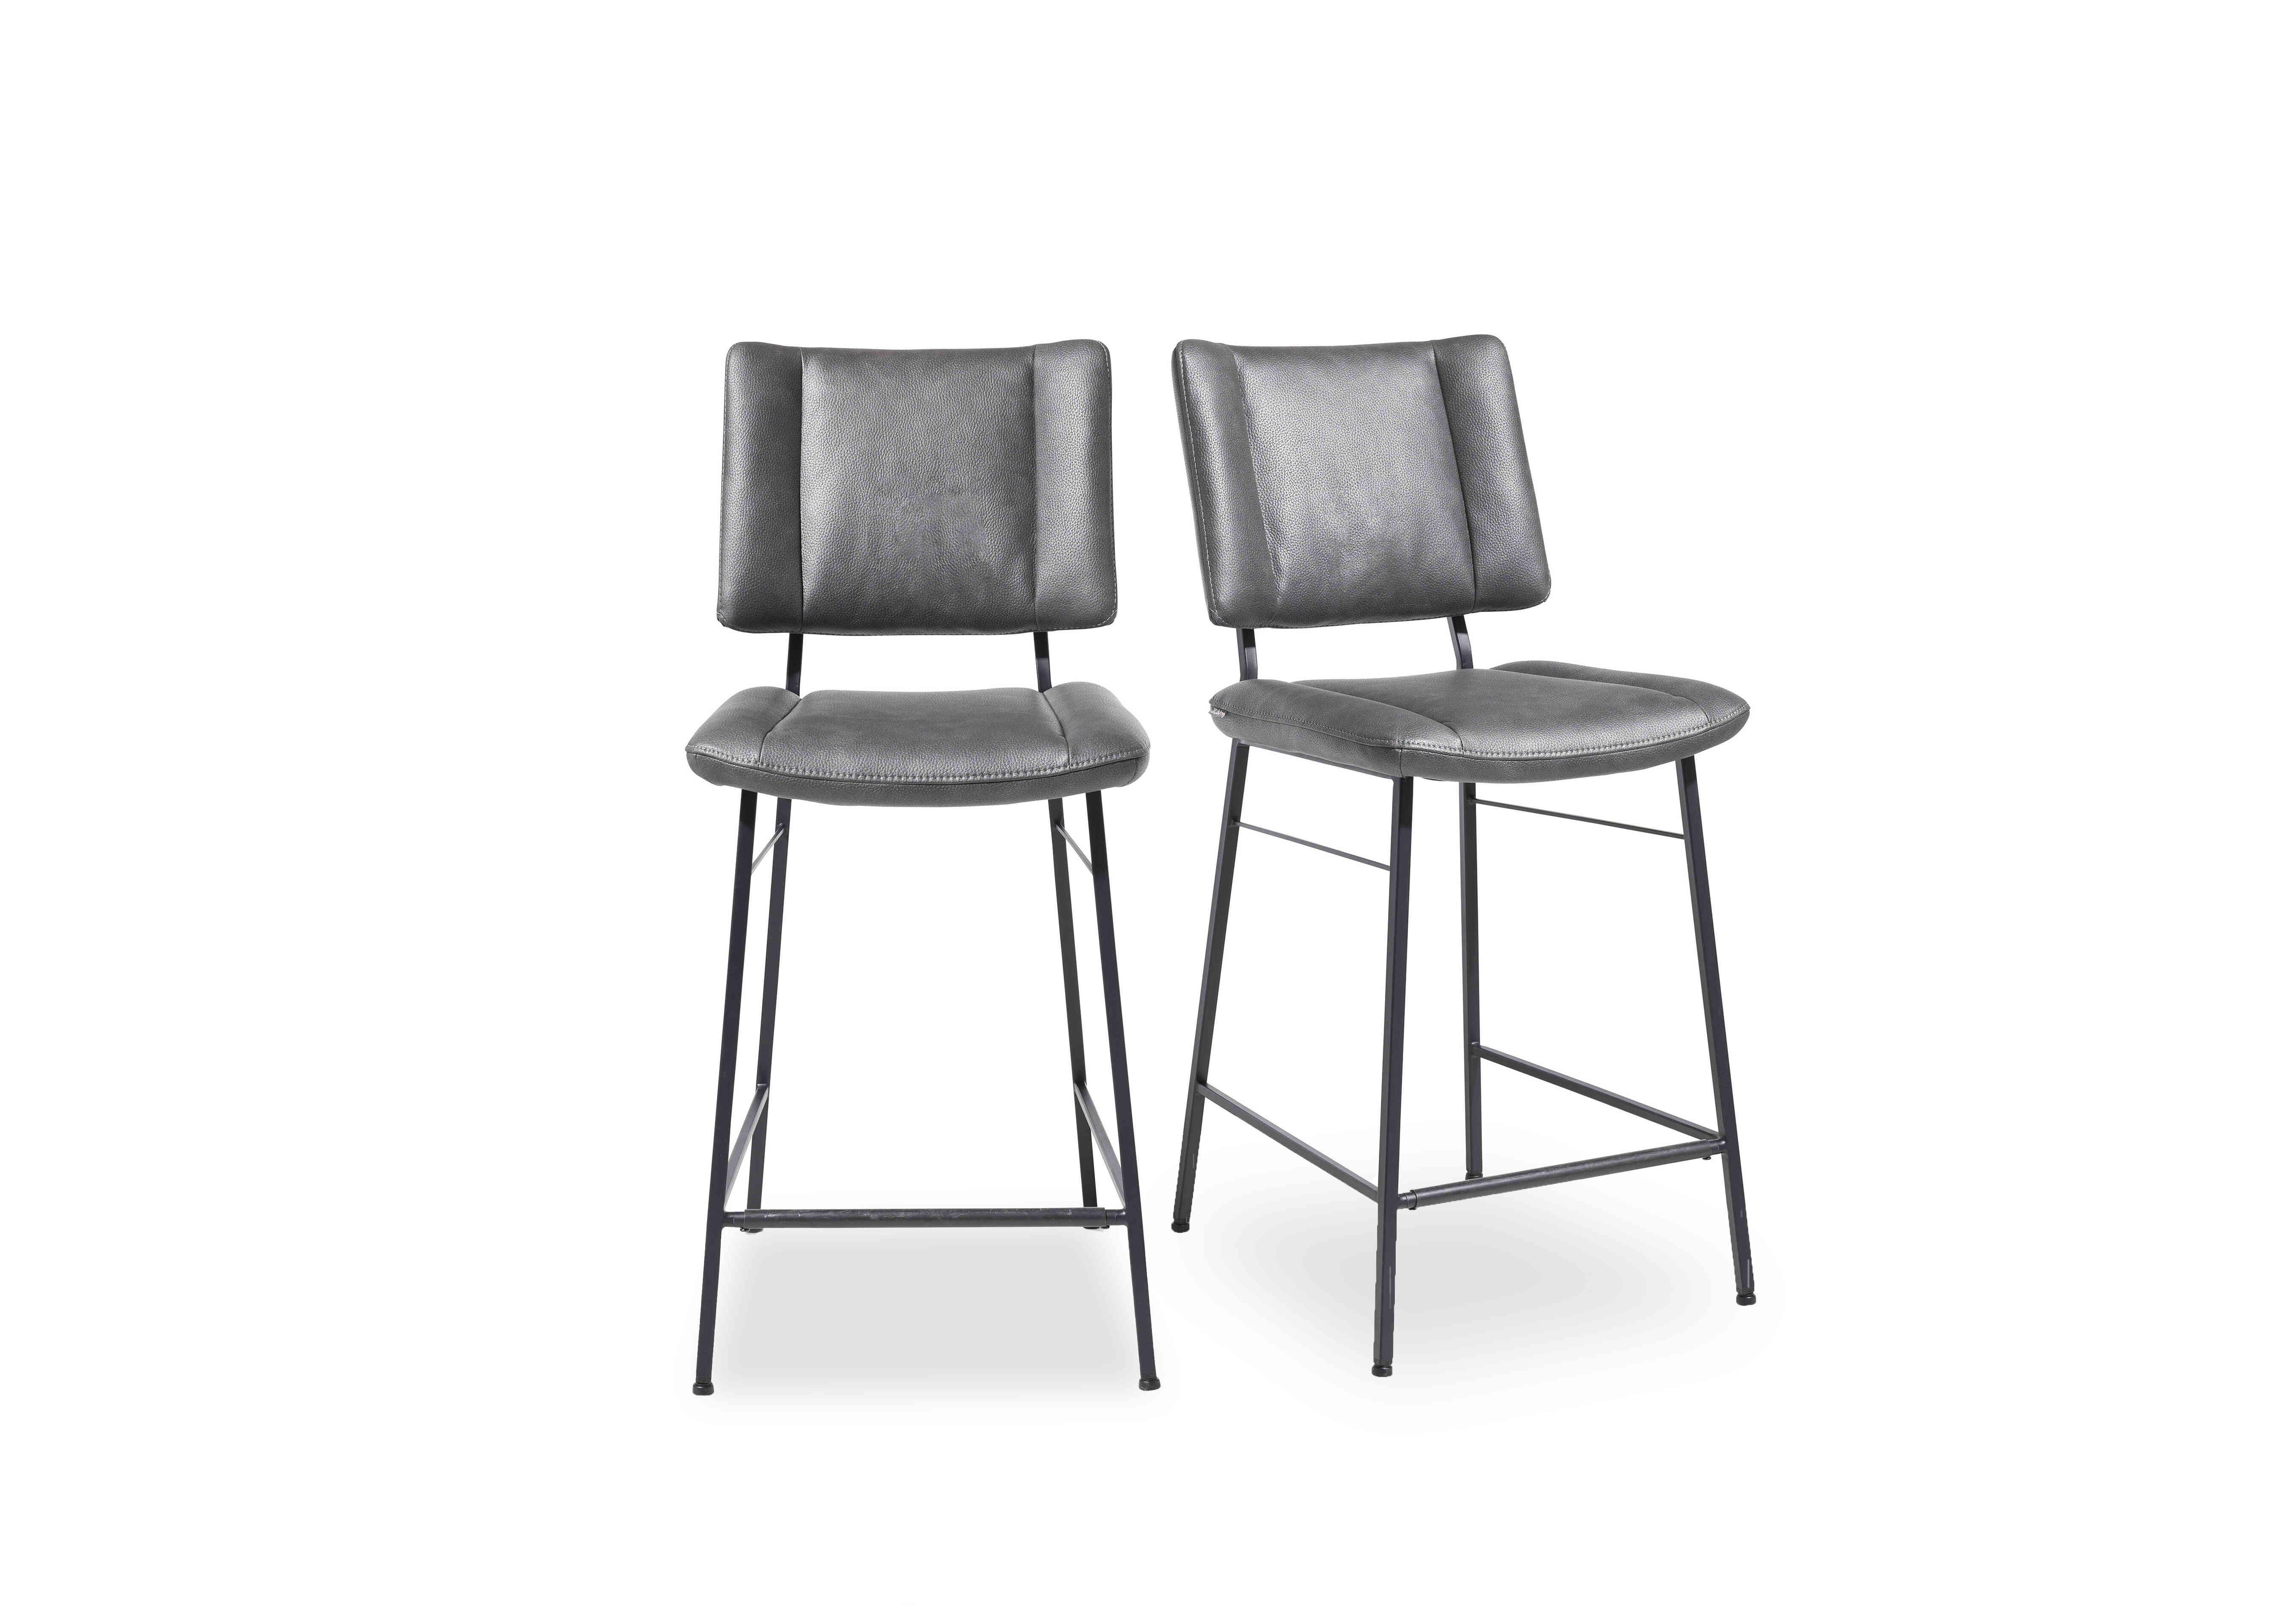 Toronto Pair of Faux Leather Fixed Bar Stools in Anthracite on Furniture Village